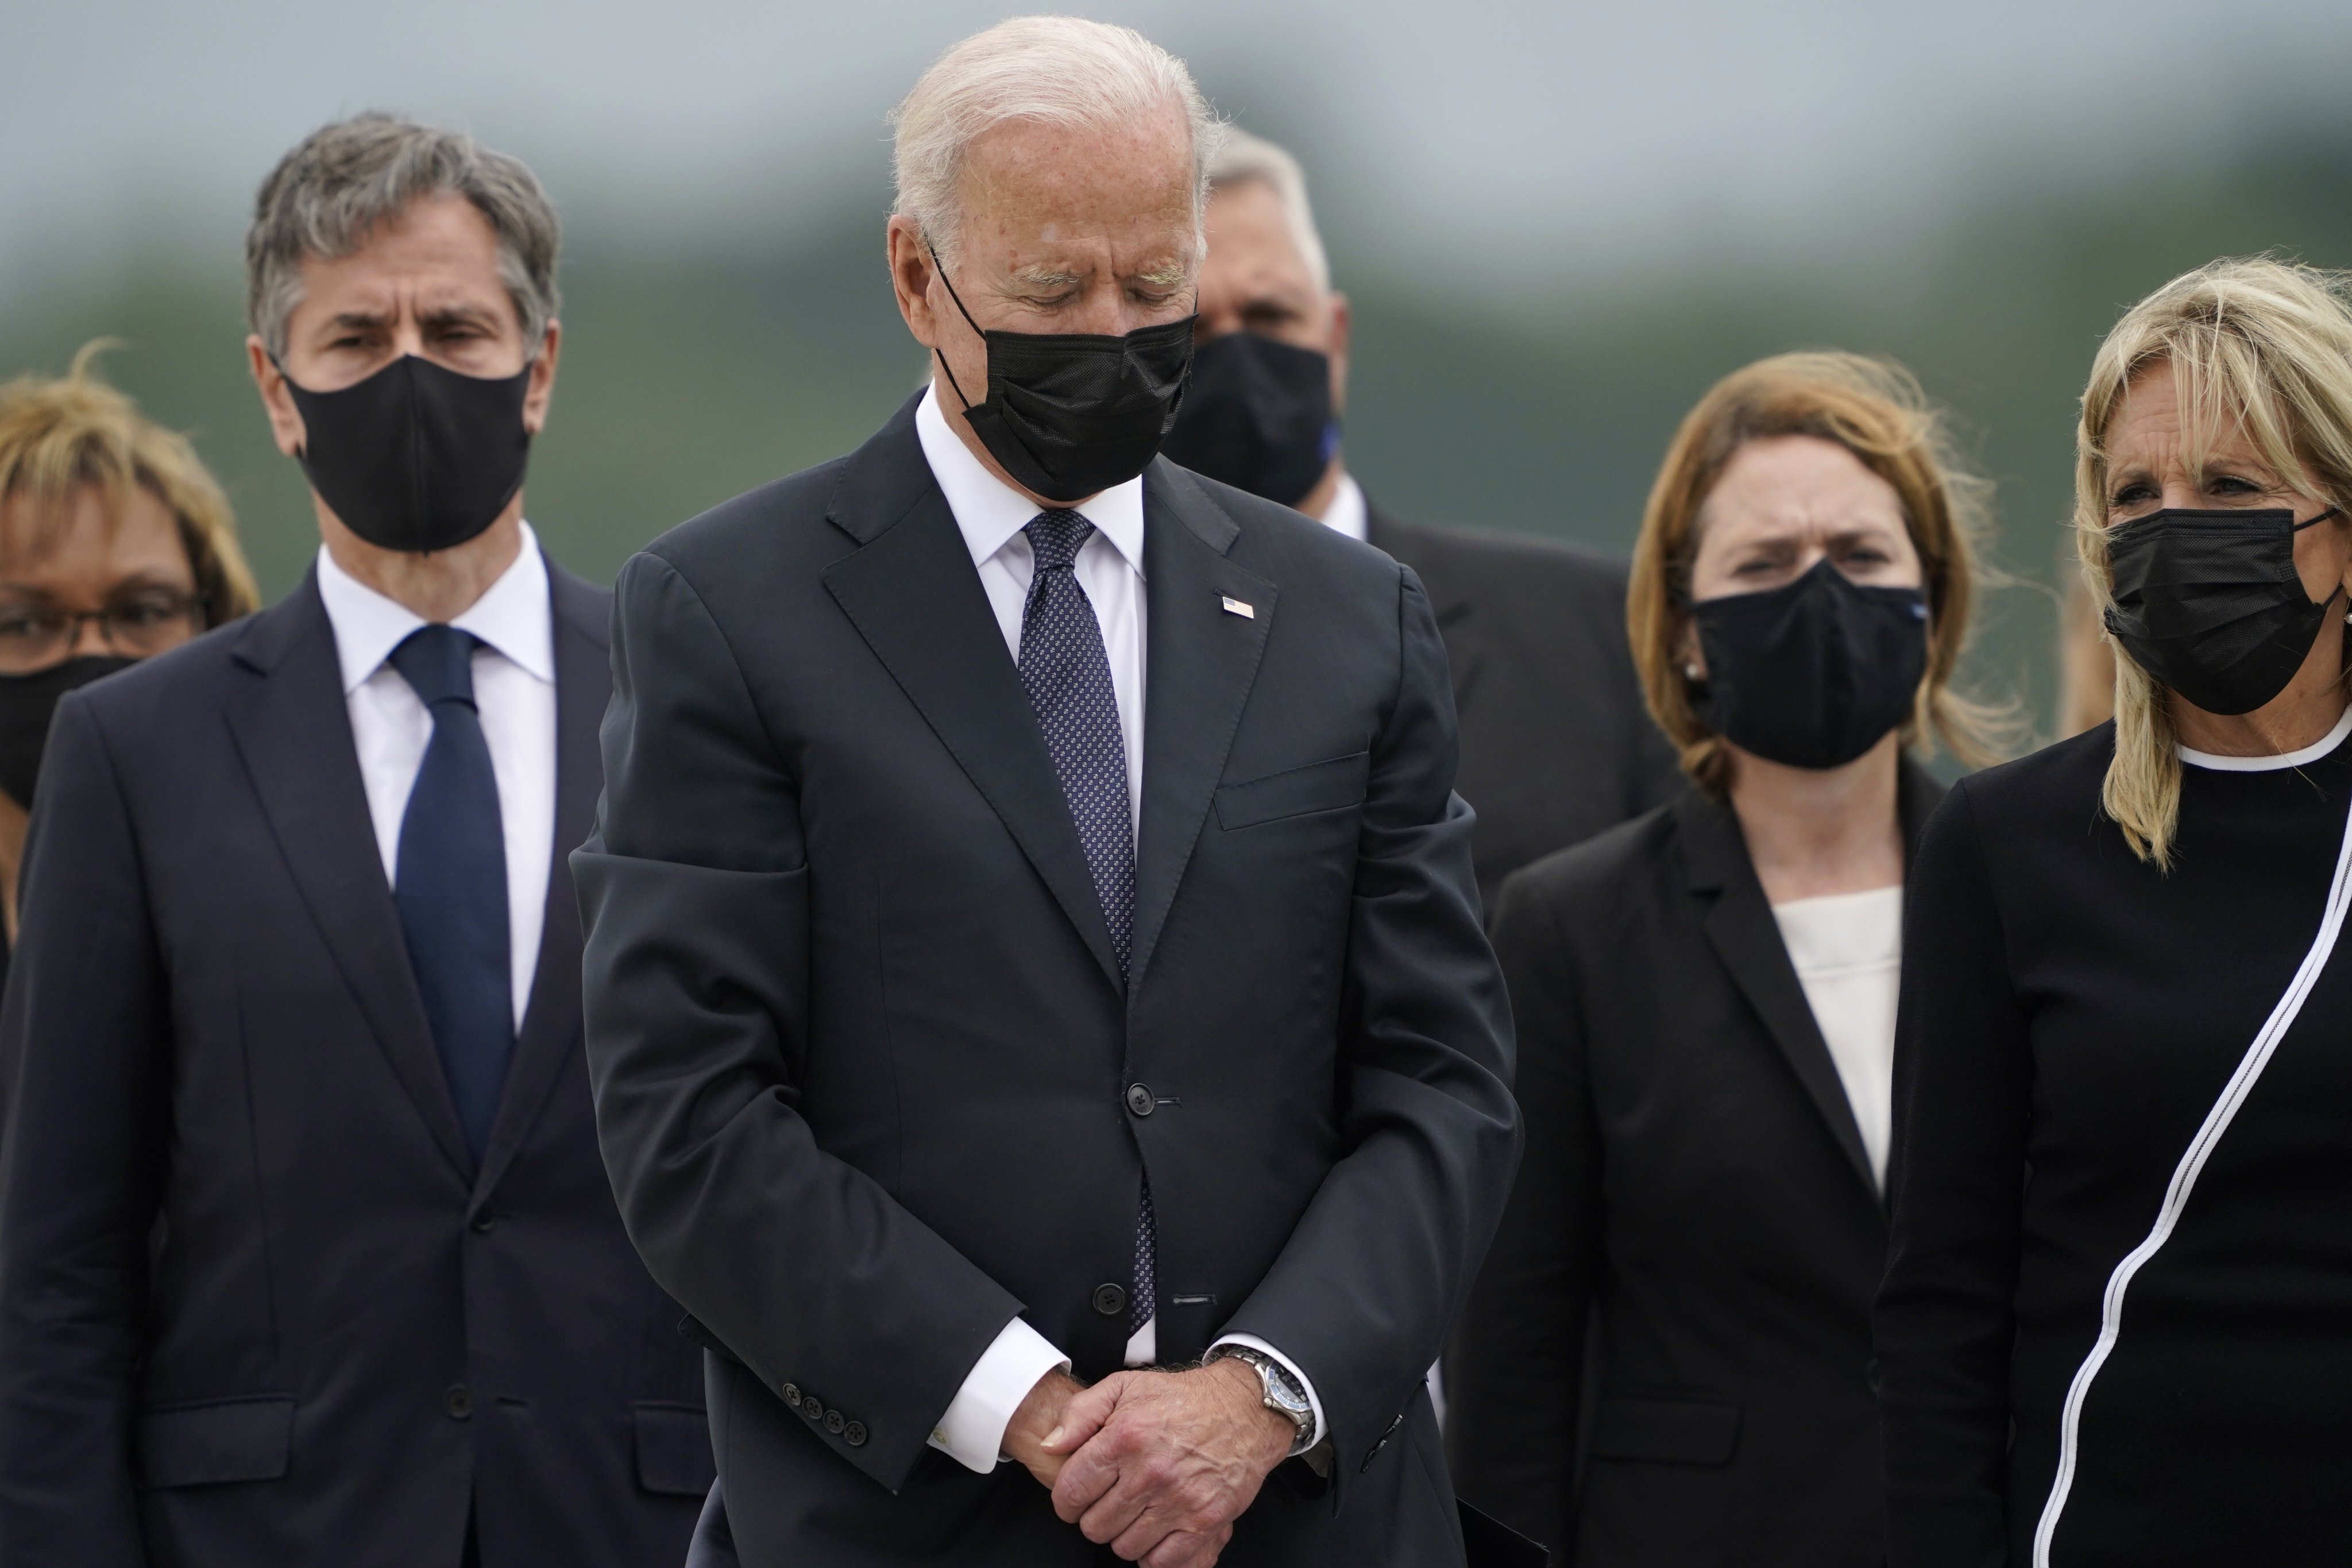 US President Joe Biden bows his head at Dover Air Force Base in Delaware, on August 29, during a casualty return of the 13 service members killed in the suicide bombing in Kabul, Afghanistan, on August 26. Photo: AP